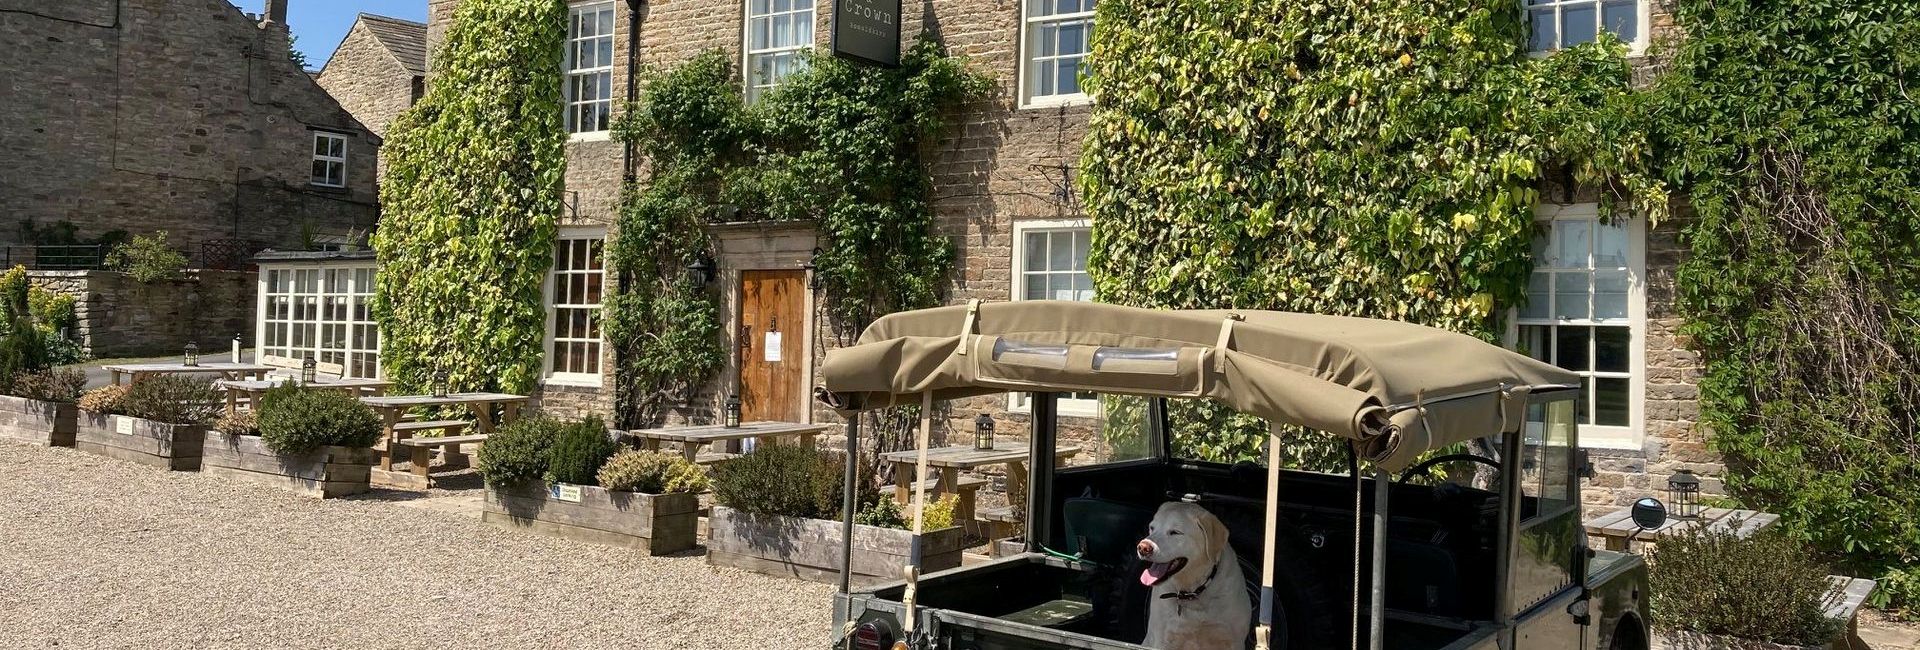 The Rose & Crown with dog in the car in Teesdale